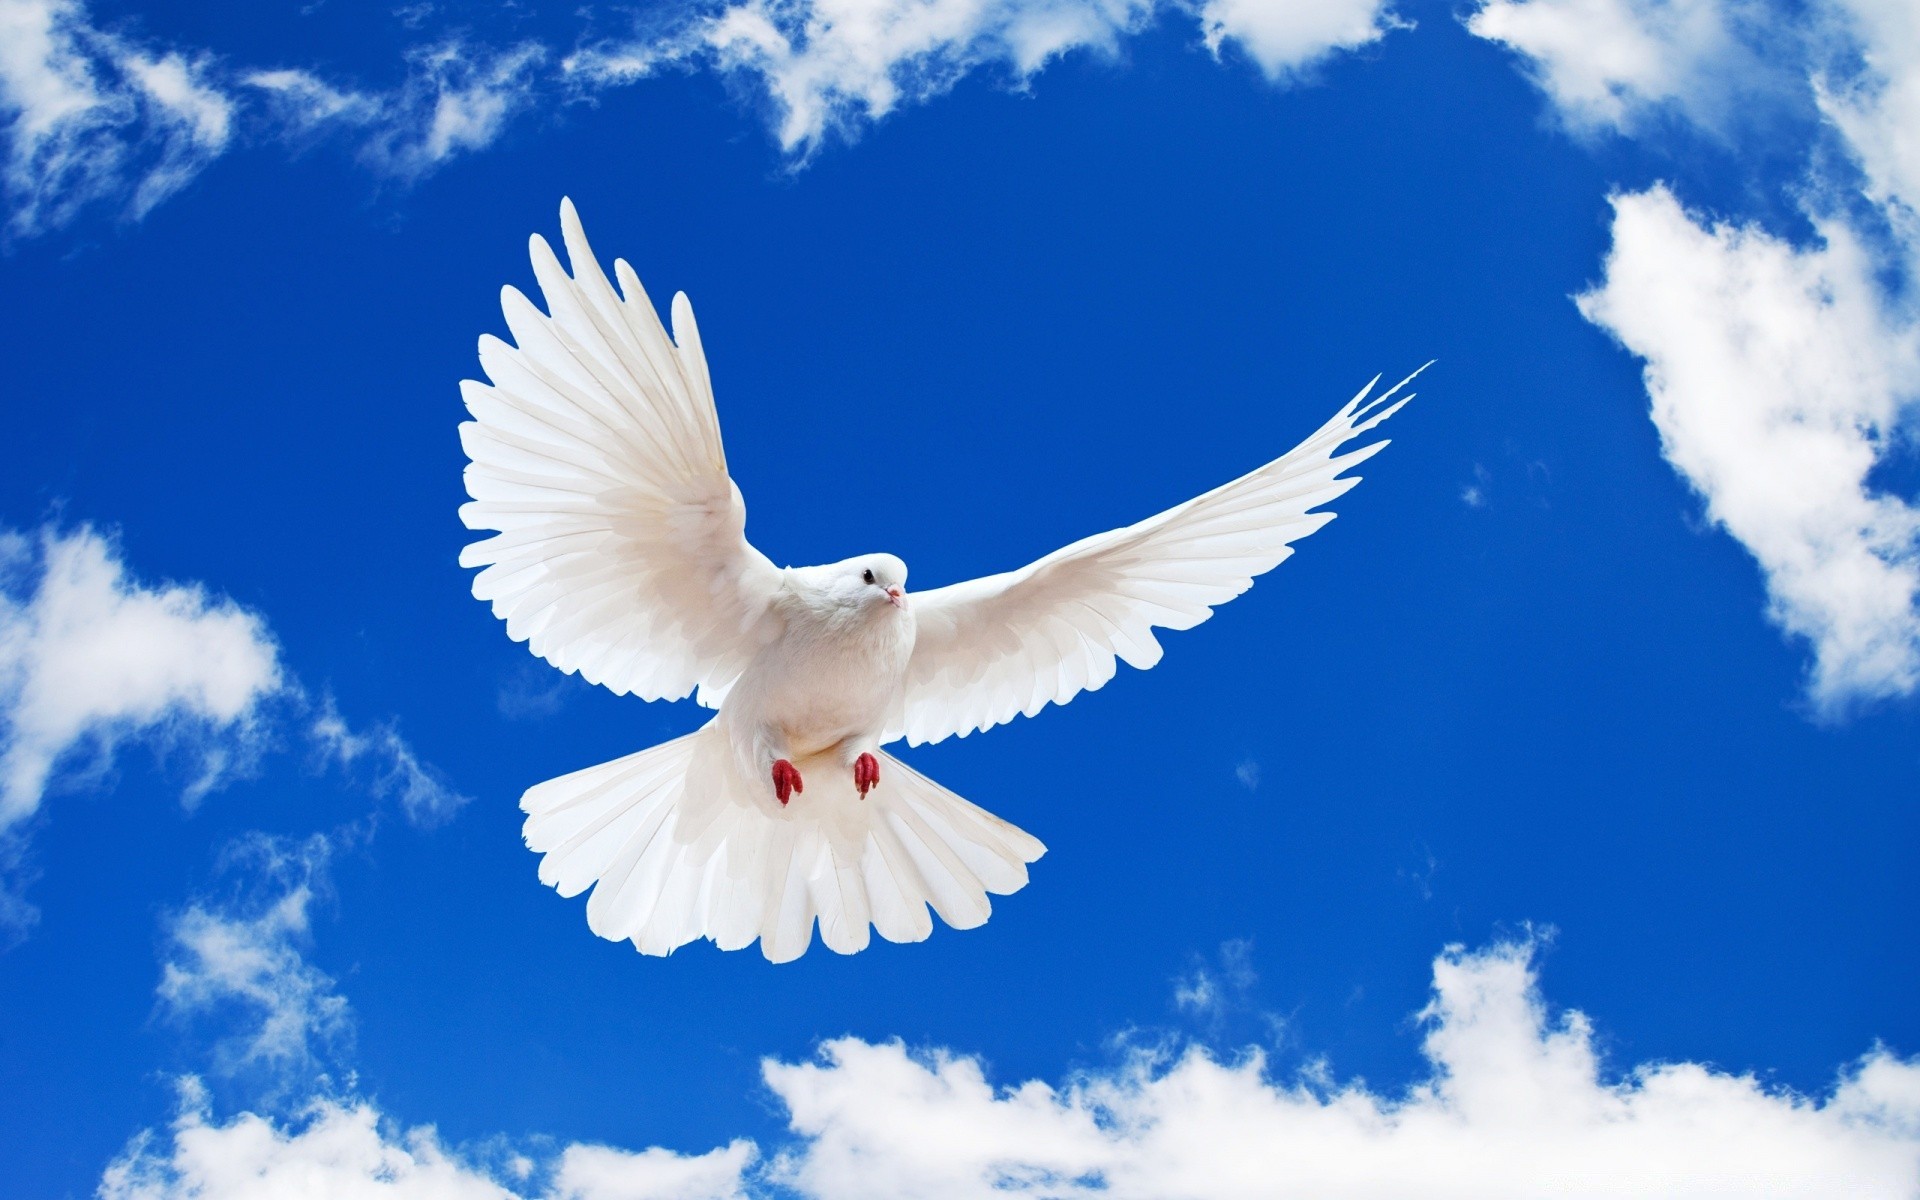 dove bird nature freedom flight sky pigeon wing fly outdoors seagulls feather heaven summer wildlife